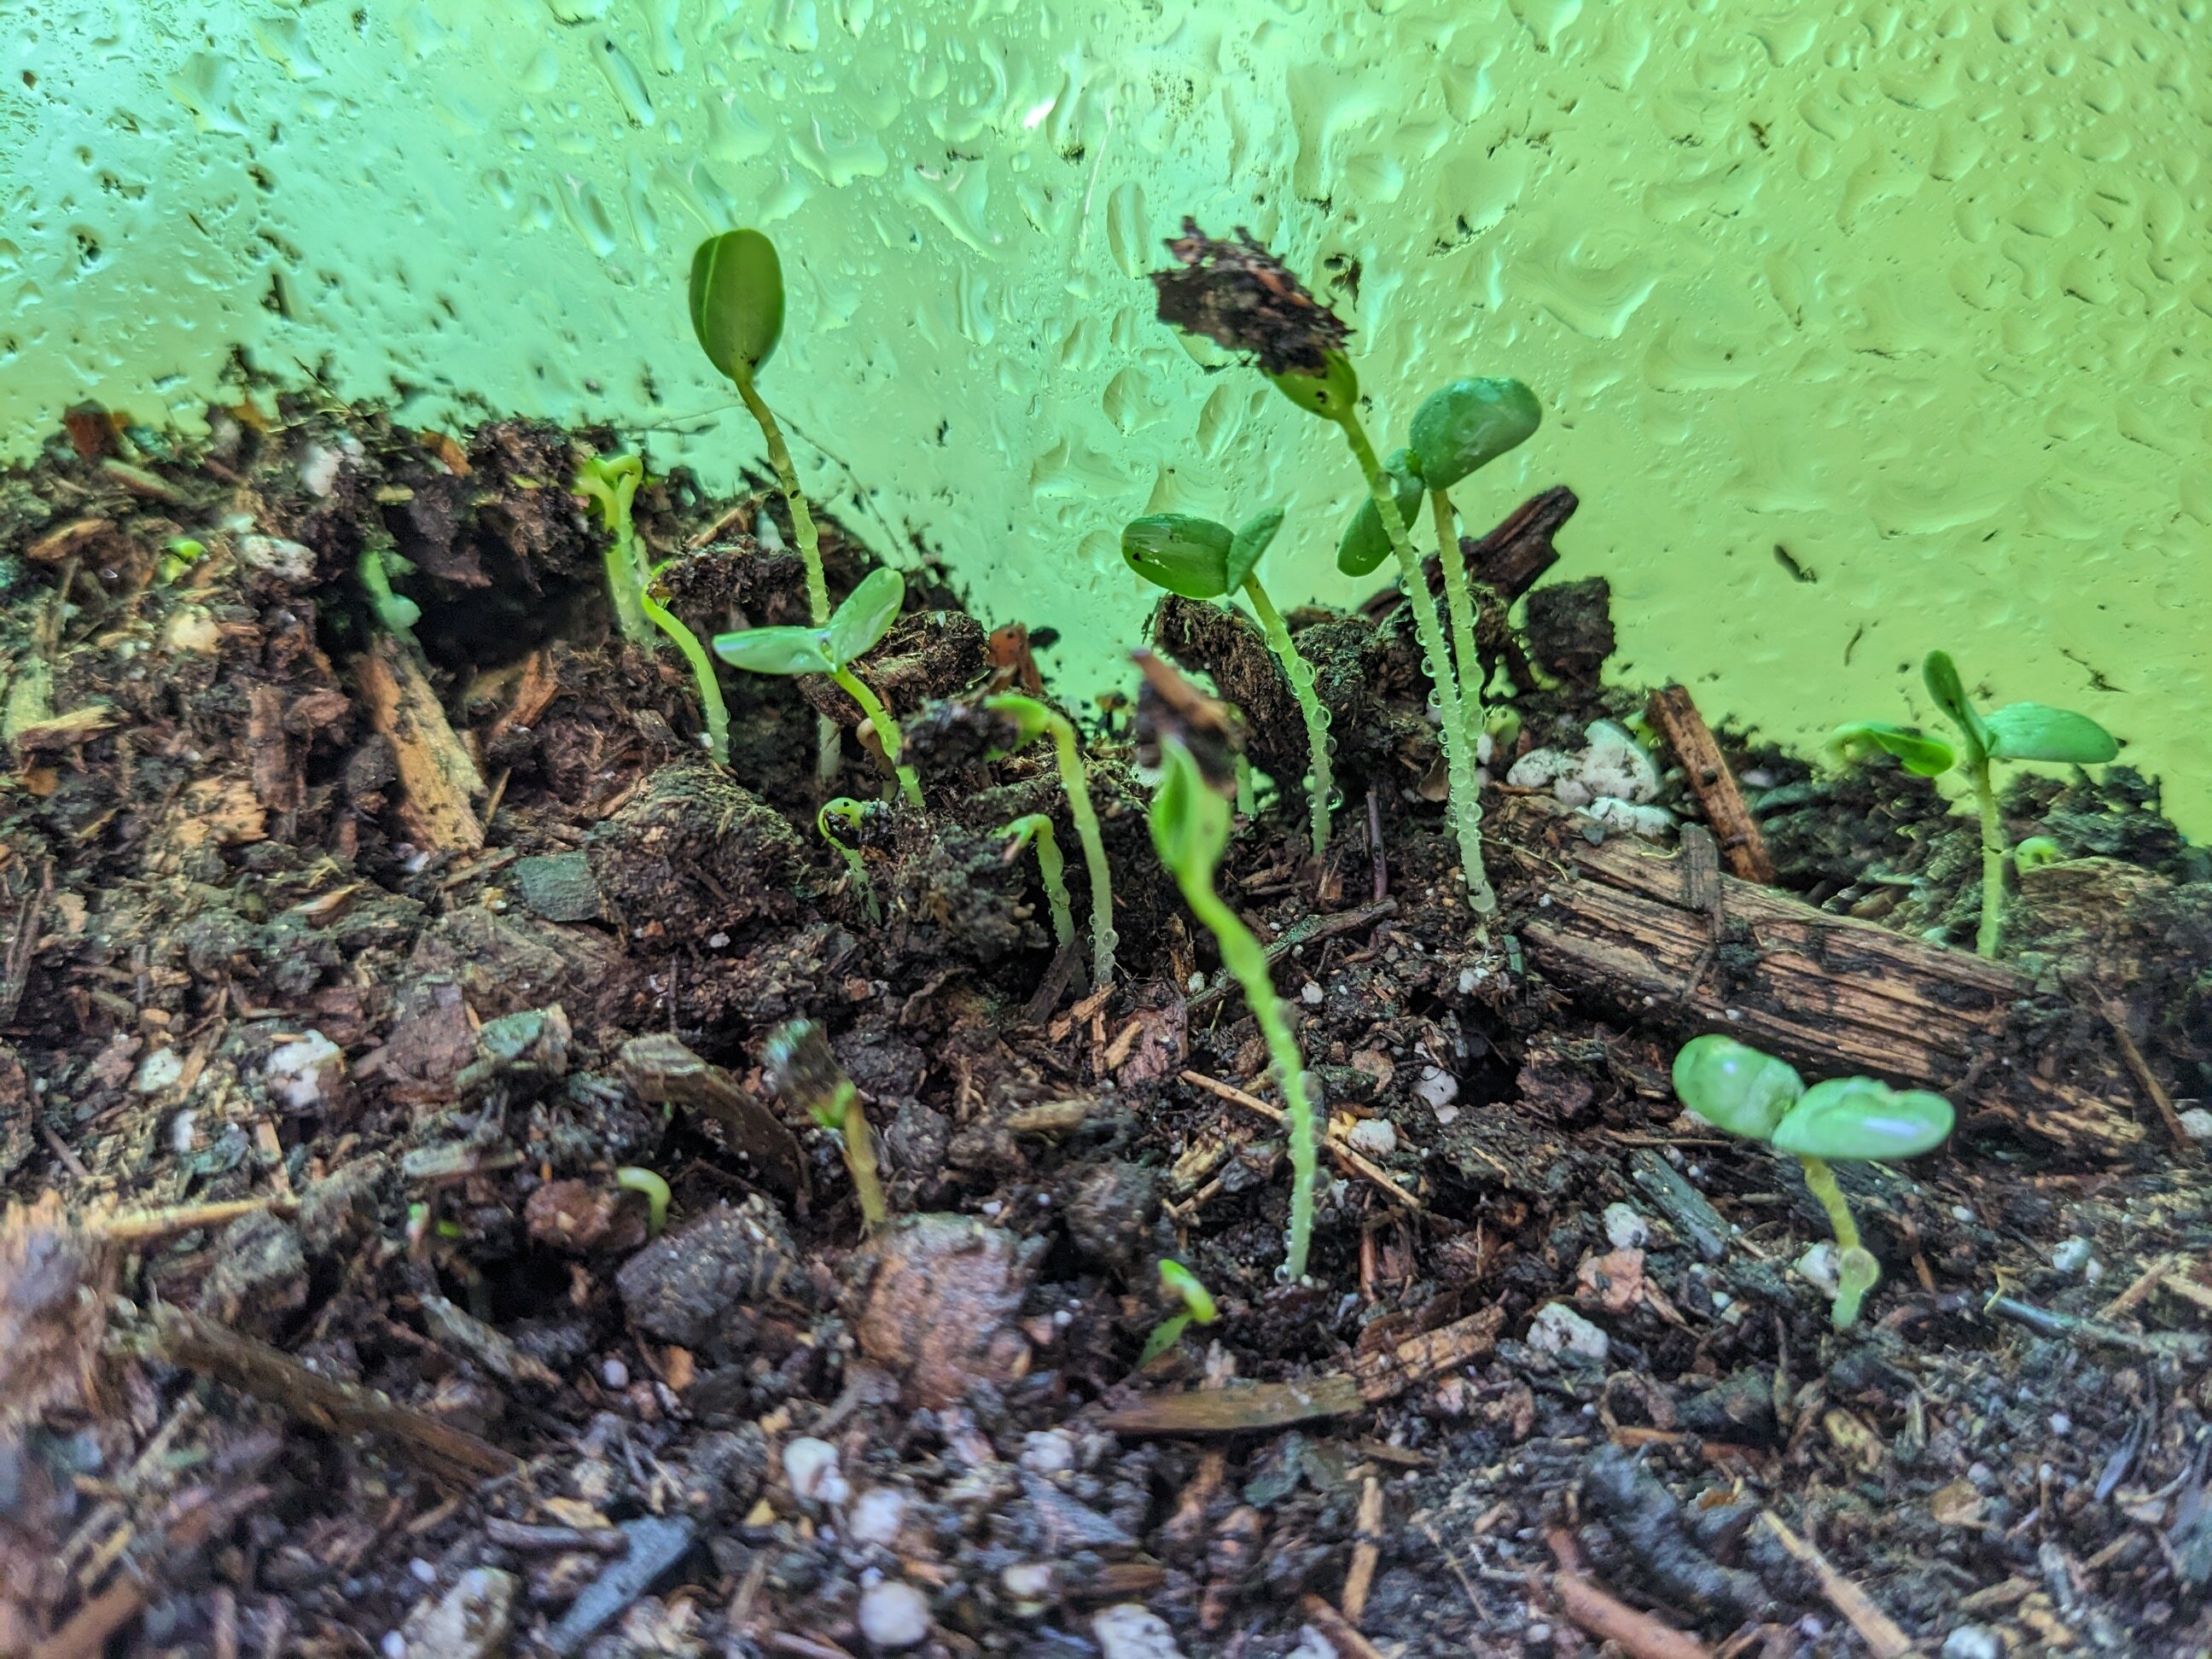 A close-up photo of flax seedlings poking up from under the soil.